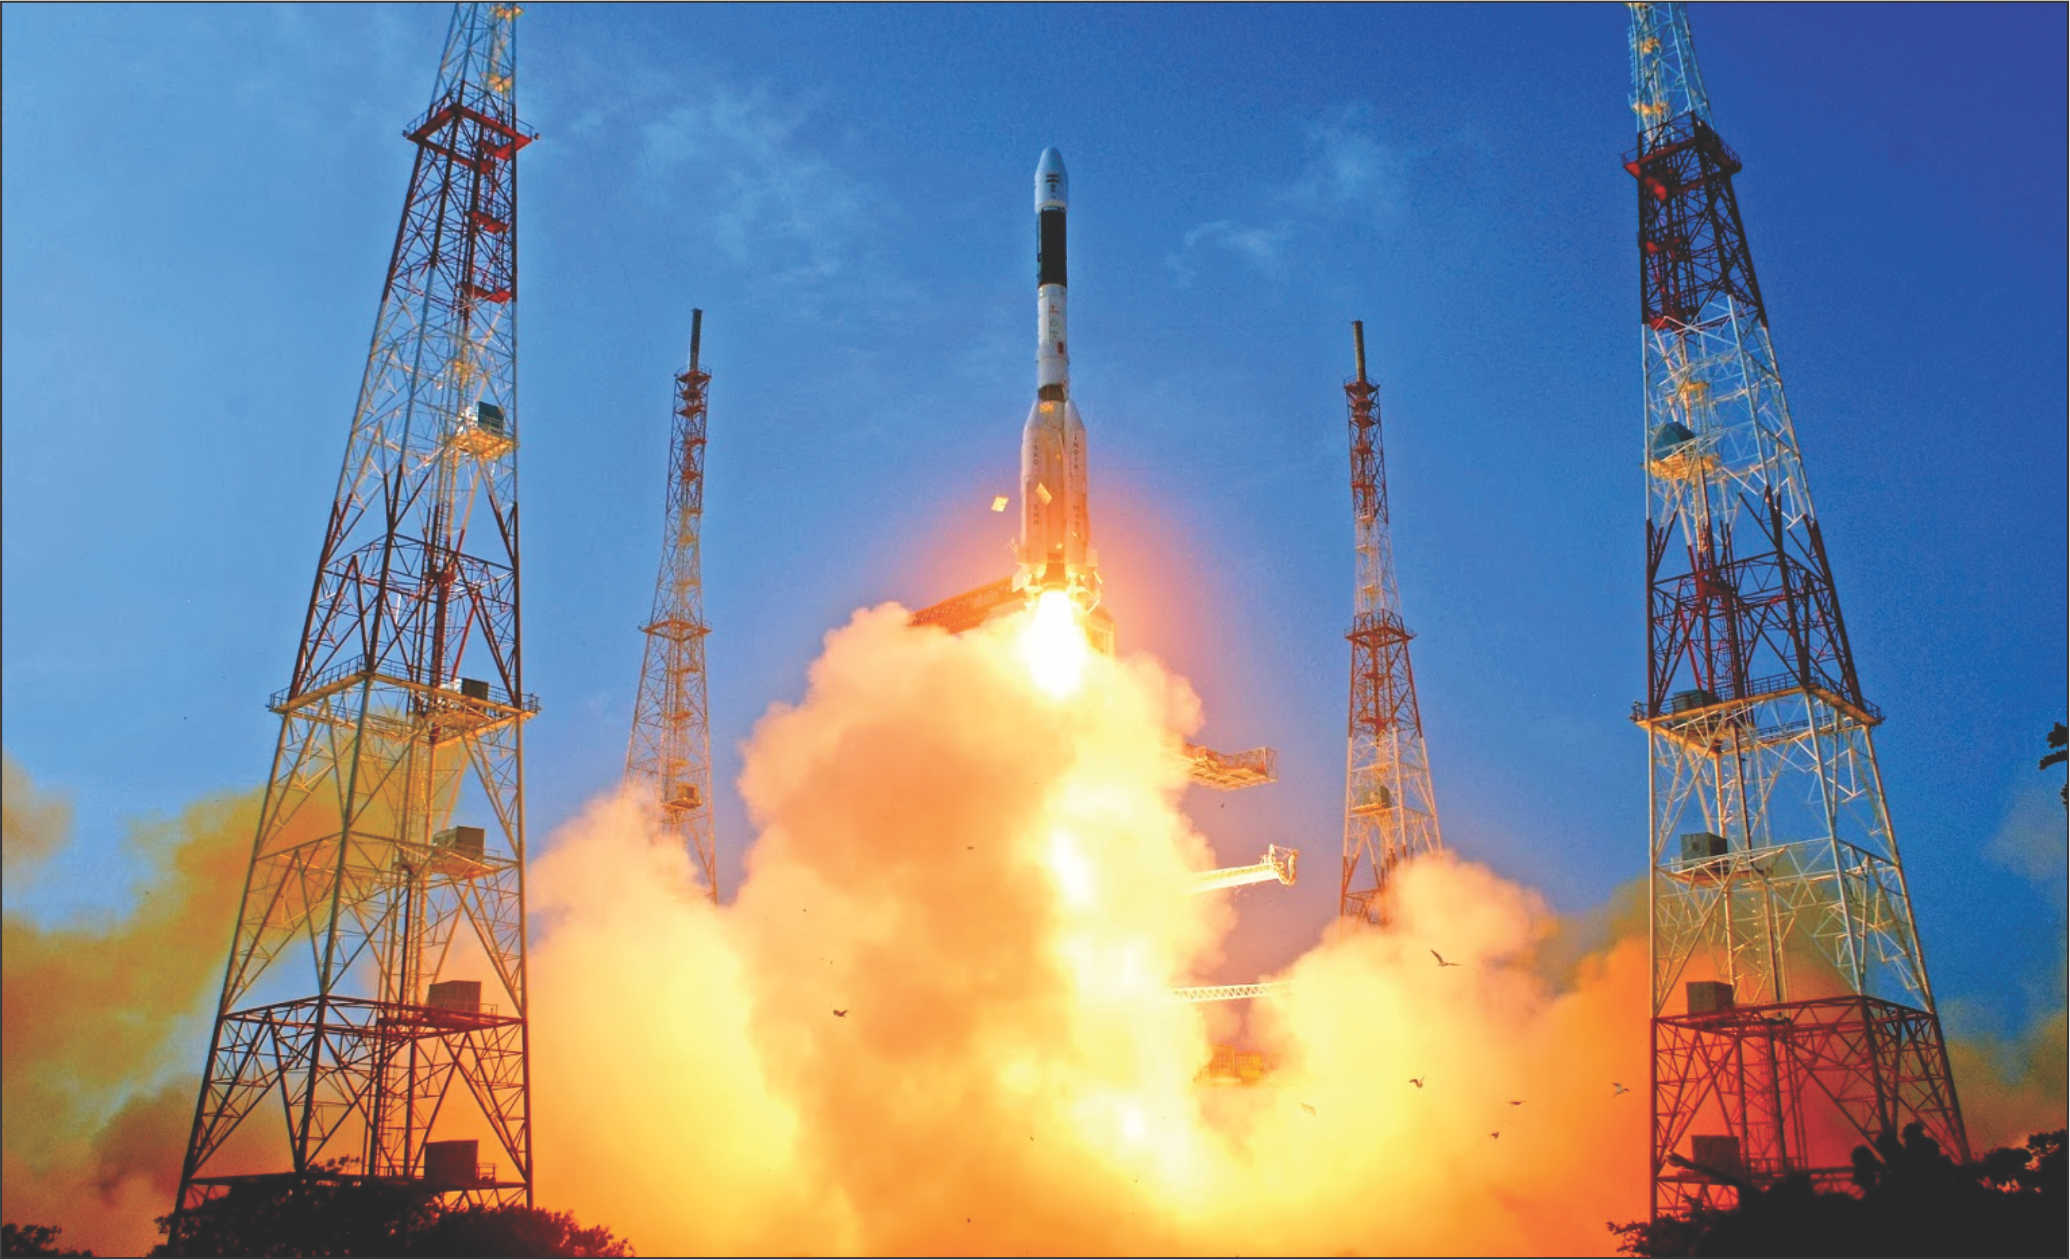 Space Mission-A Major Boost to the Indian Space Programme